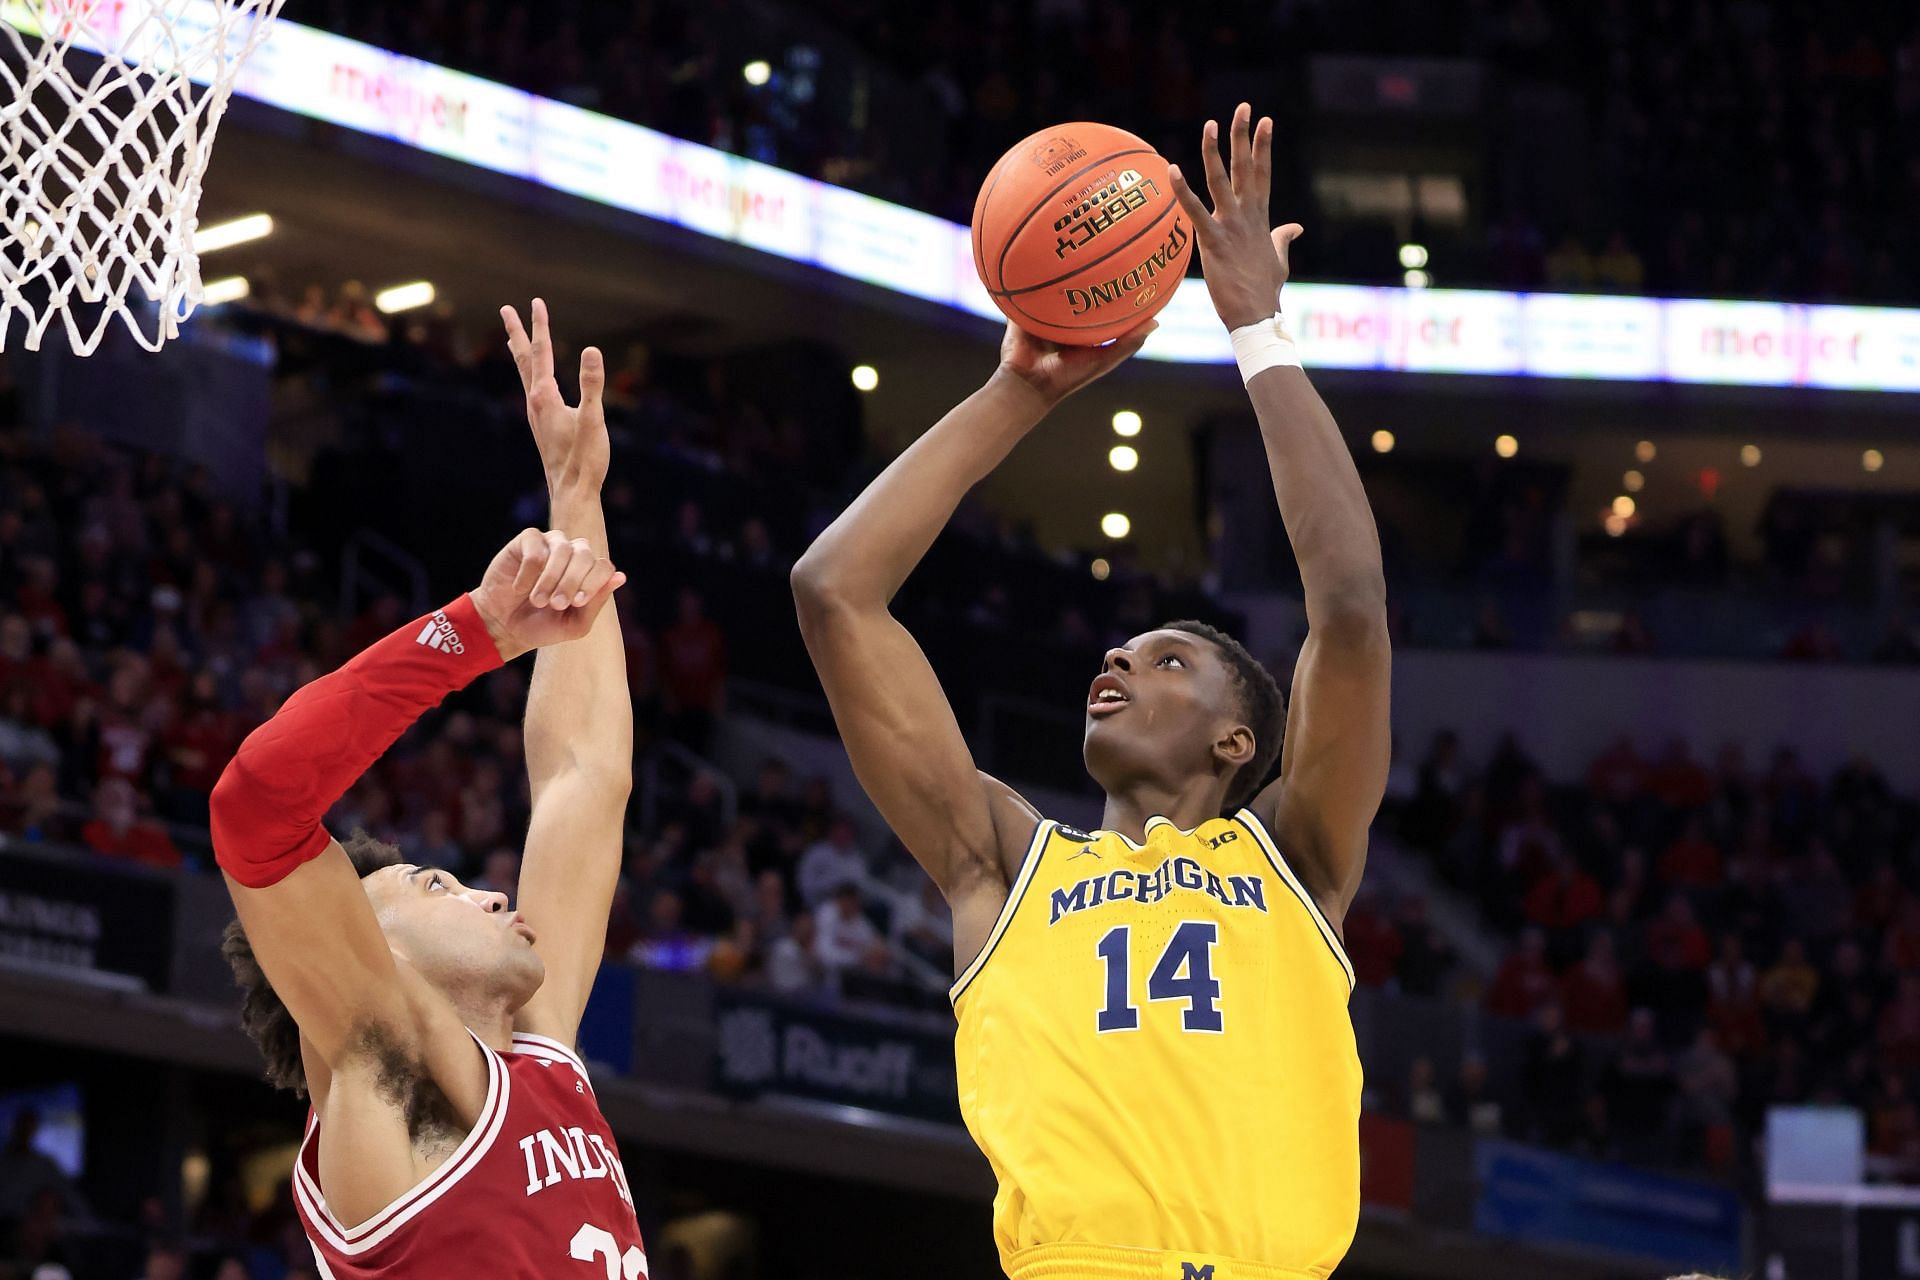 Moussa Diabate had a solid first season at Michigan but decided to enter the 2022 NBA Draft.